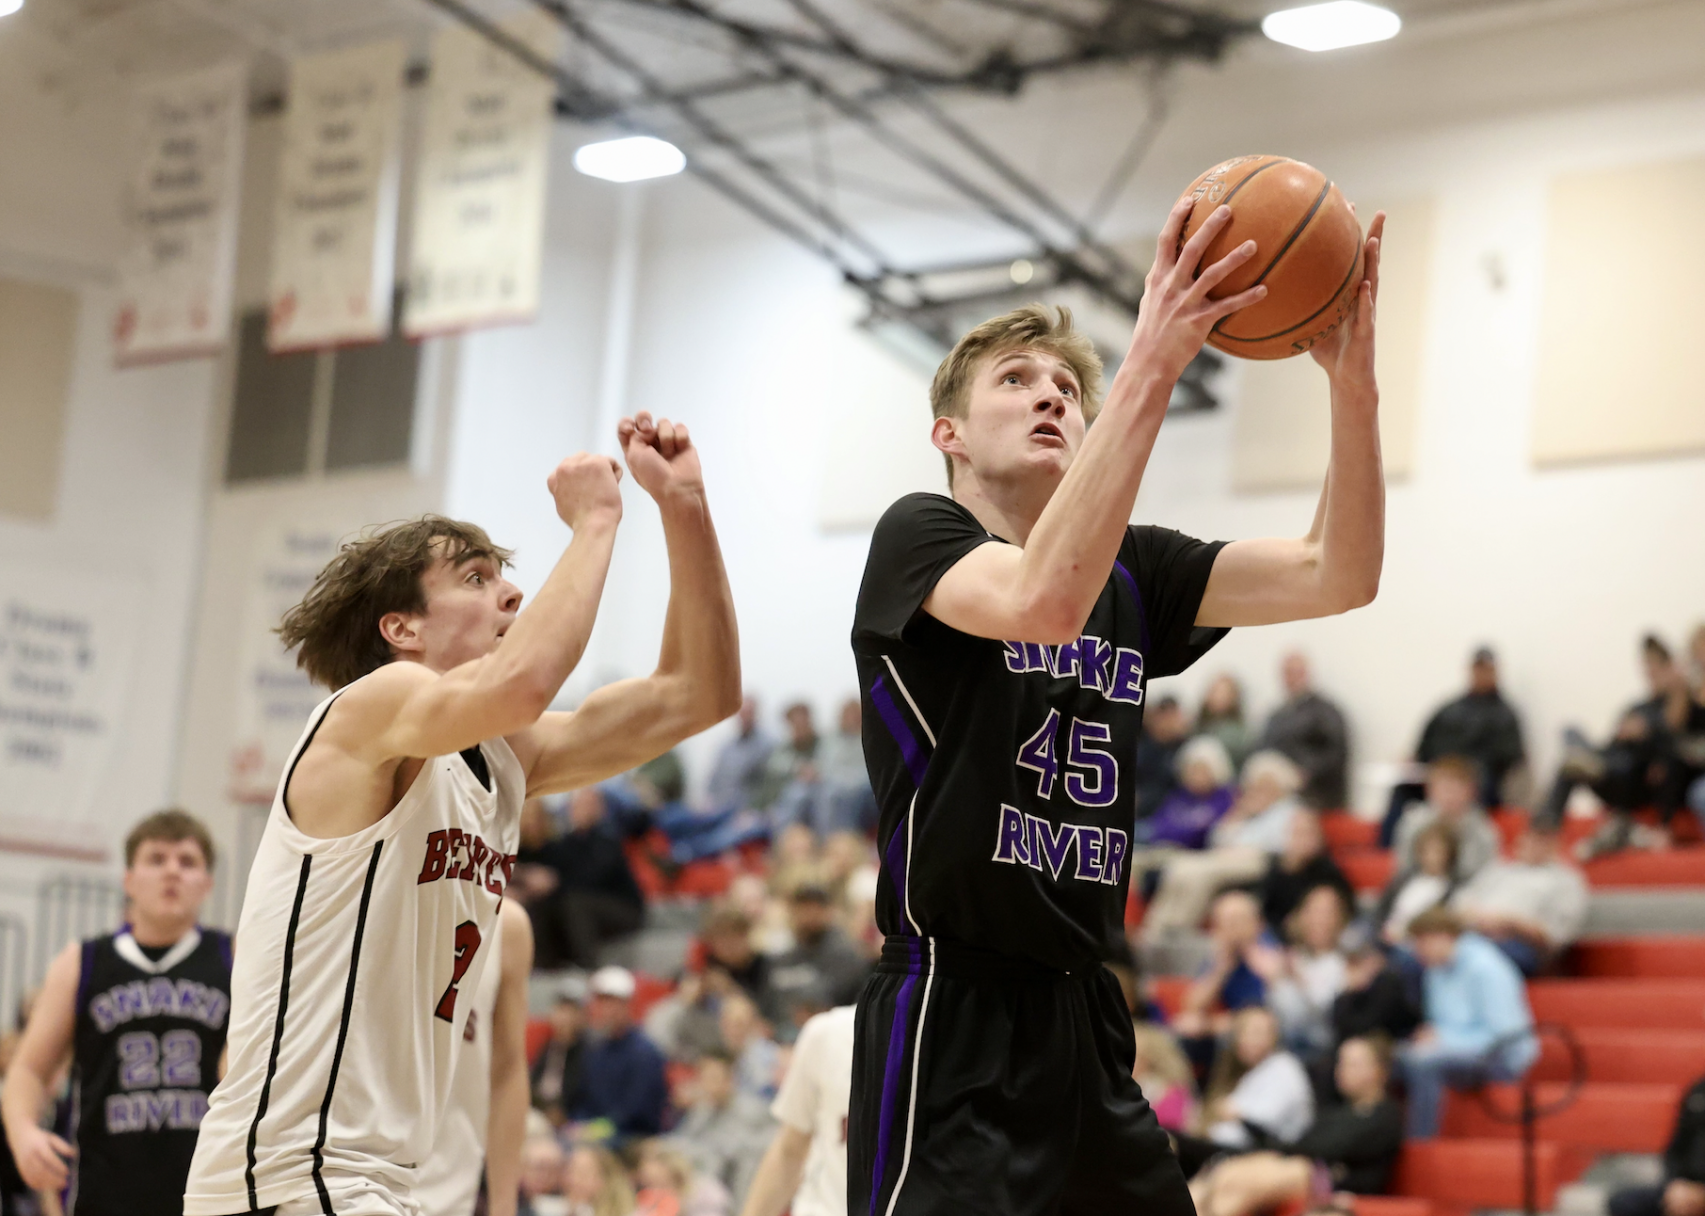 Snake River Boys Basketball Dominates State Rankings with Impressive Performance